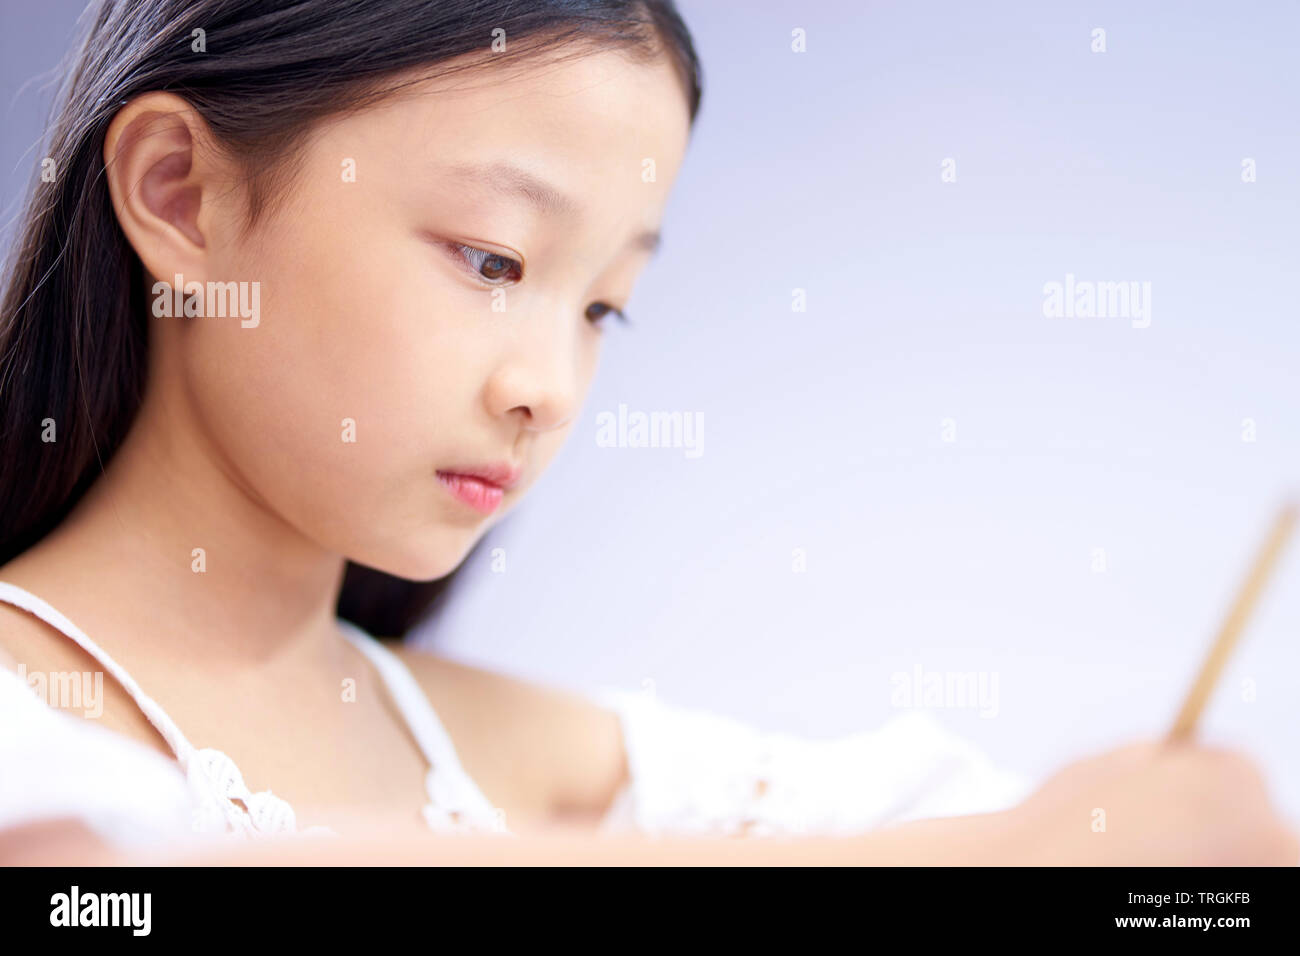 face of a little asian girl with long black hair writing or drawing, close-up shot. Stock Photo